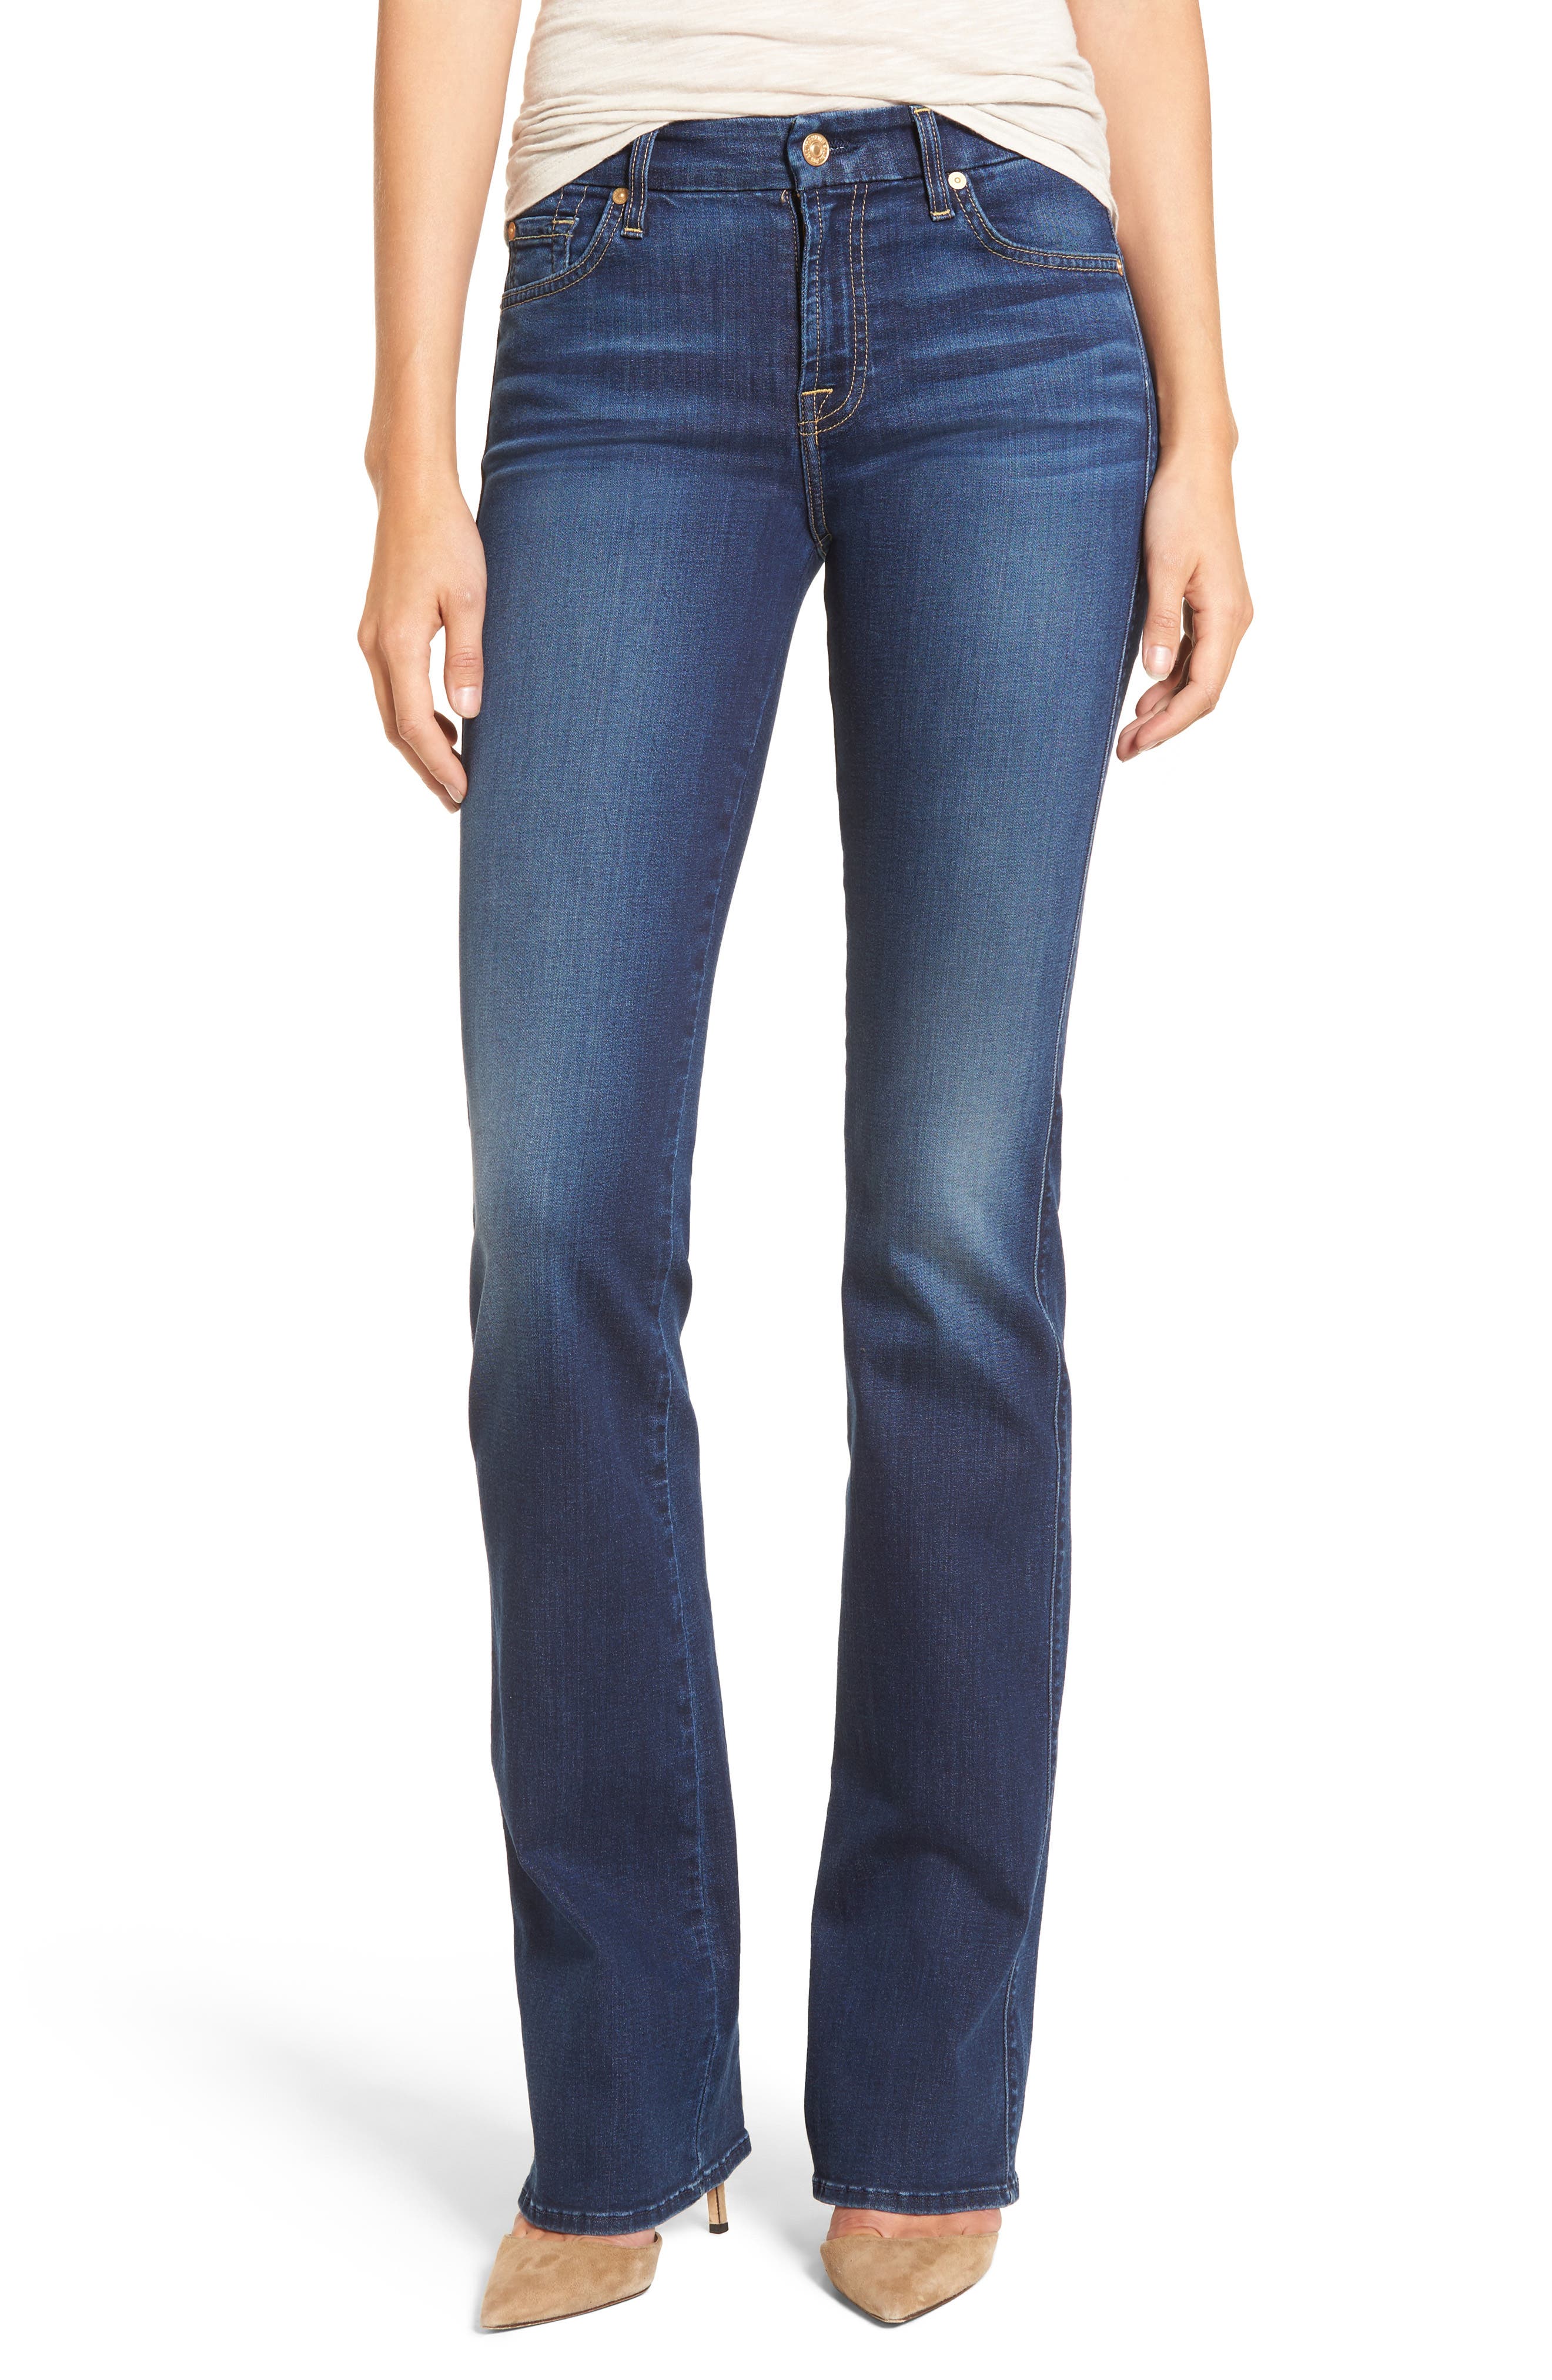 7 For All Mankind Denim Mid-Rise Bootcut Jeans YR2000 in Blau Damen Bekleidung Jeans Bootcut Jeans 